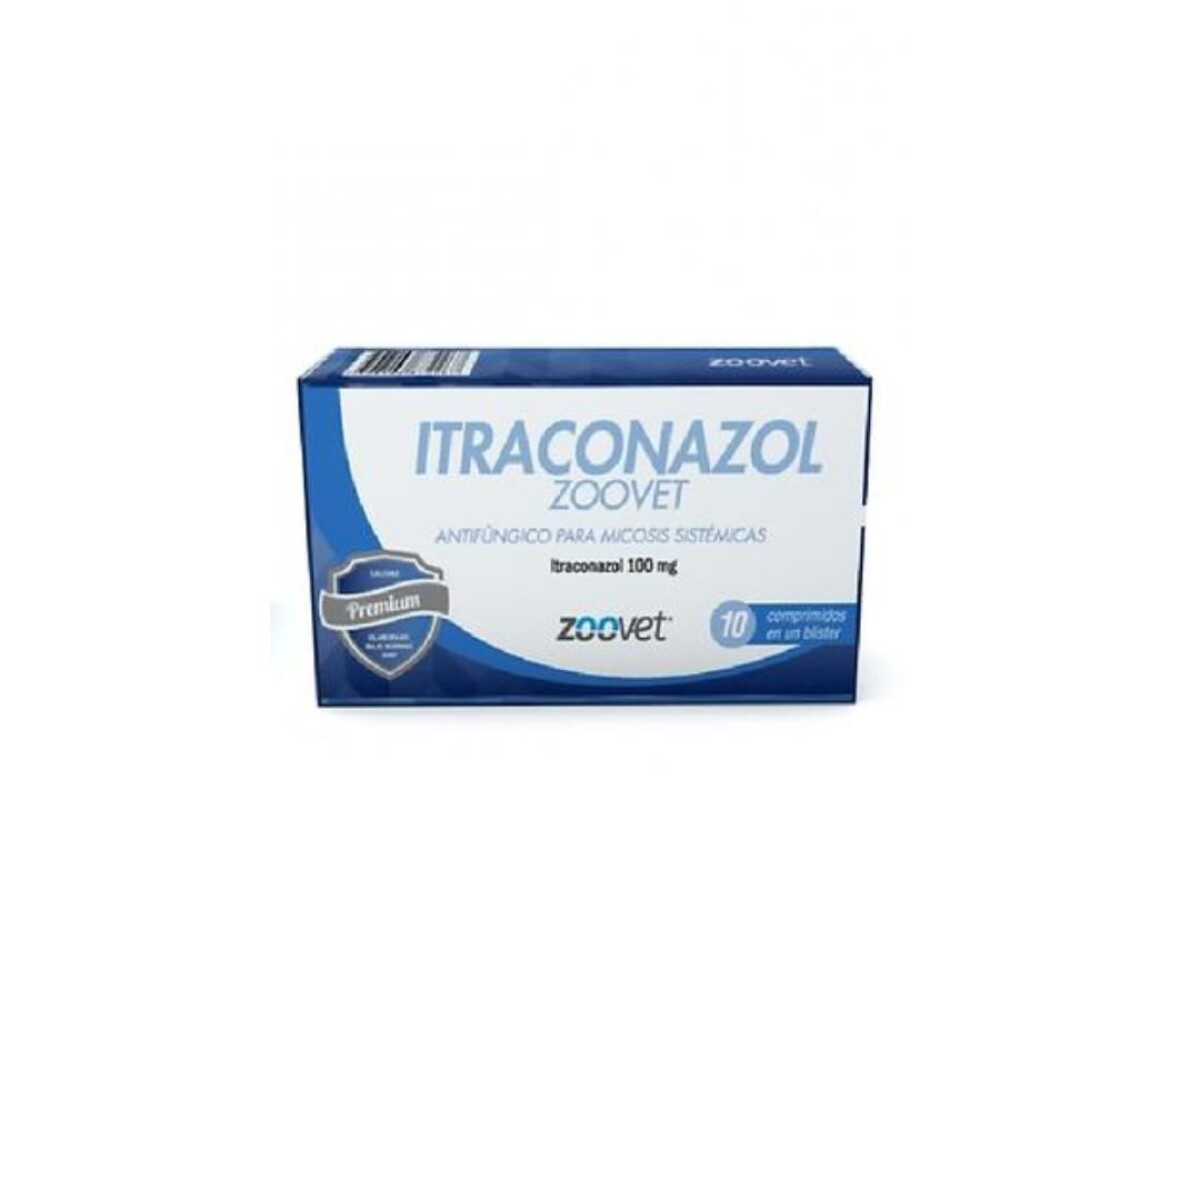 Itraconazol (blister 10 Comprimidos) 